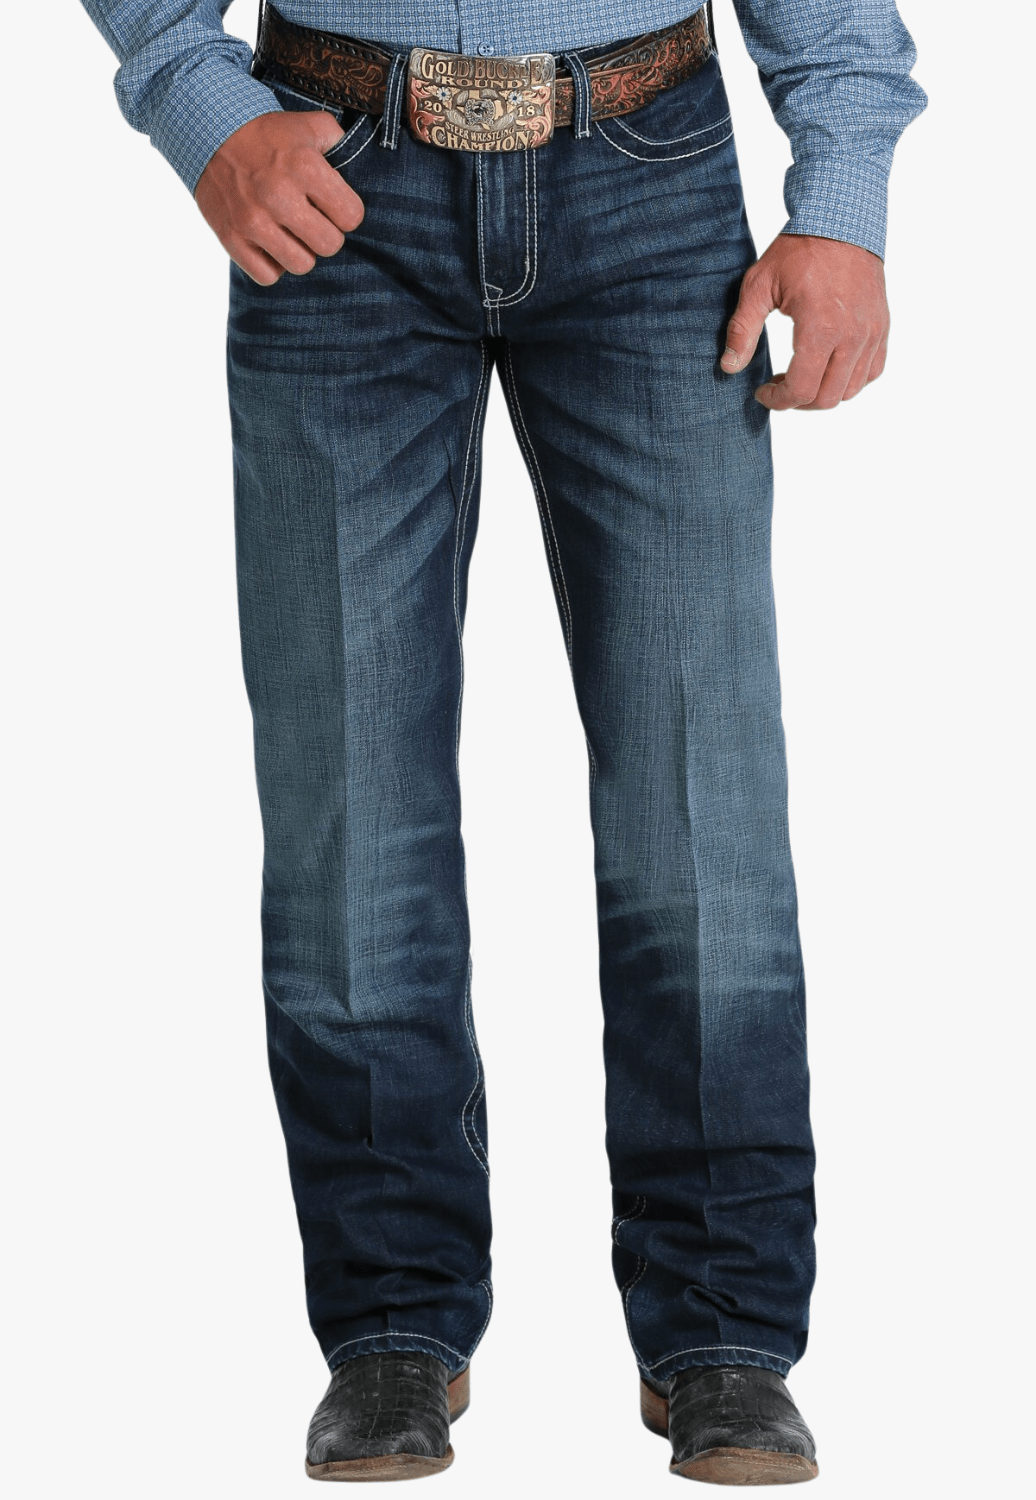 Cinch CLOTHING-Mens Jeans Cinch Mens Grant Relaxed Bootcut Jean